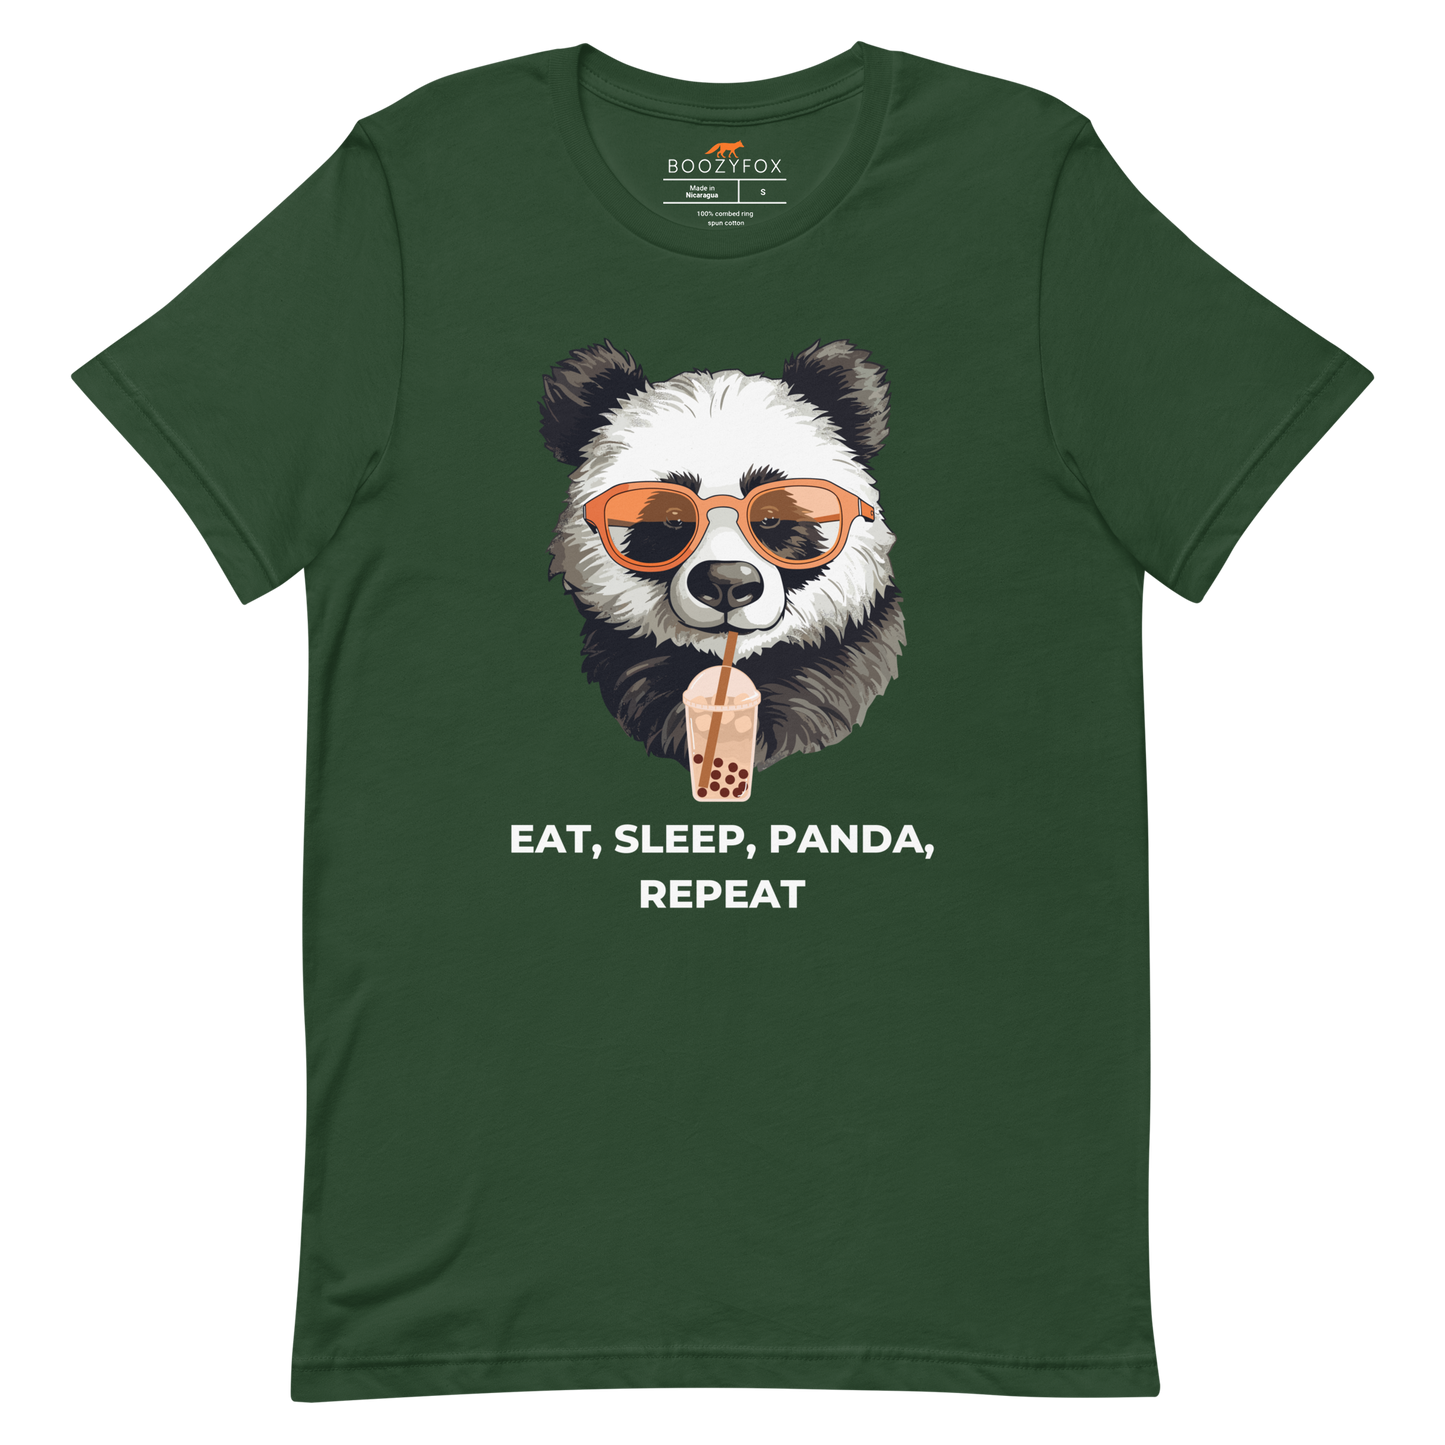 Forest Green Premium Panda Tee featuring an adorable Eat, Sleep, Panda, Repeat graphic on the chest - Funny Graphic Panda Tees - Boozy Fox